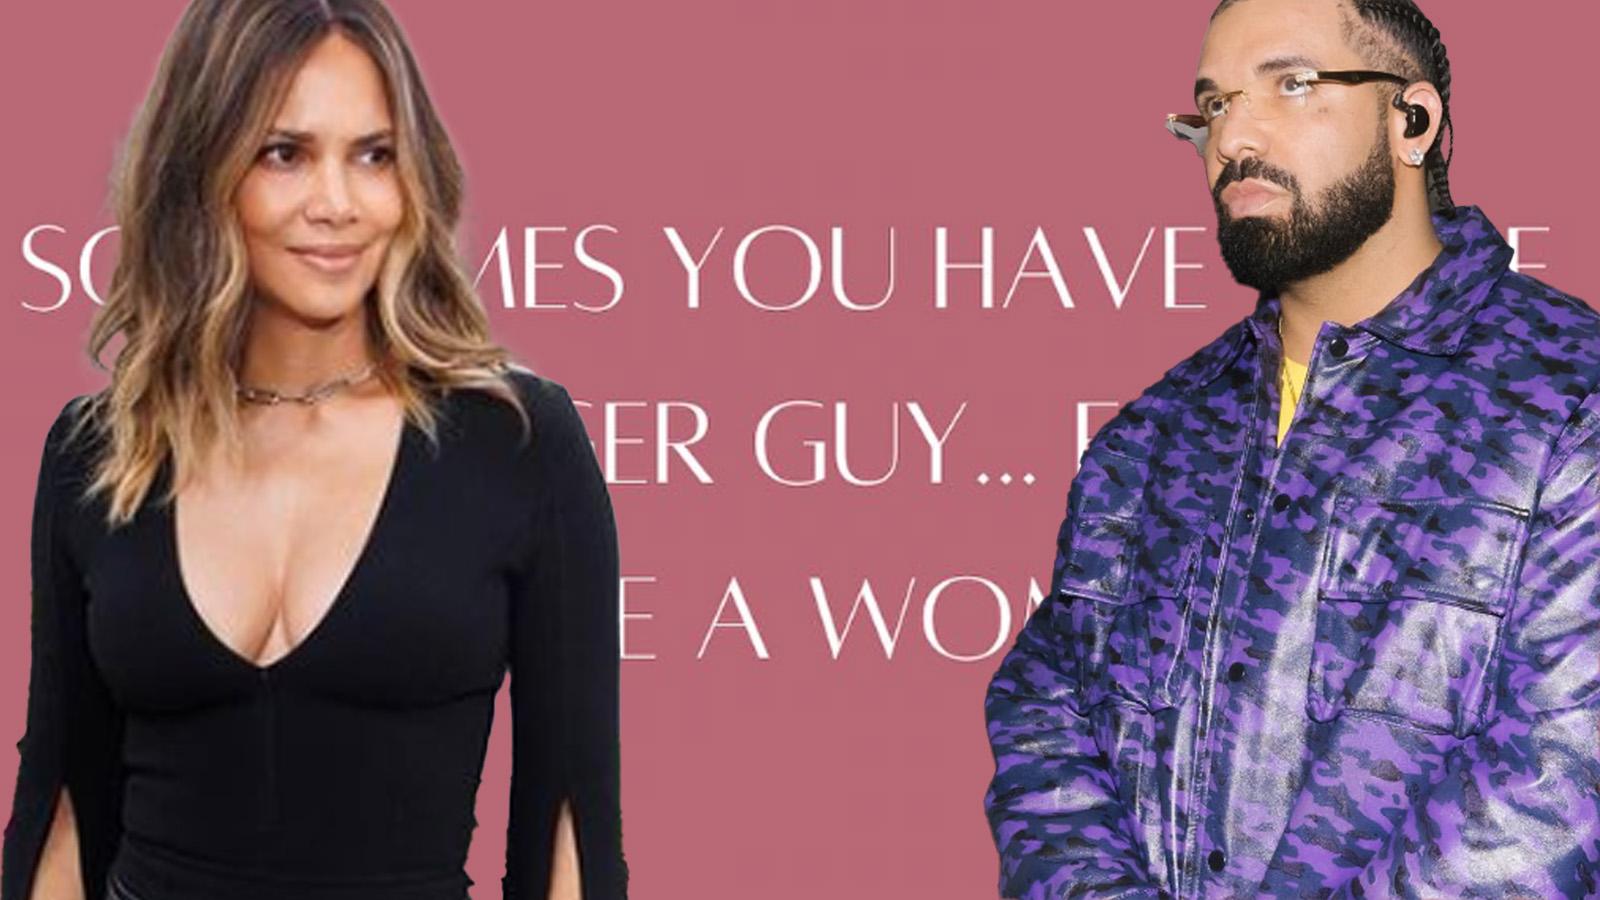 Halle Berry slams Drake for record cover using her image without permission